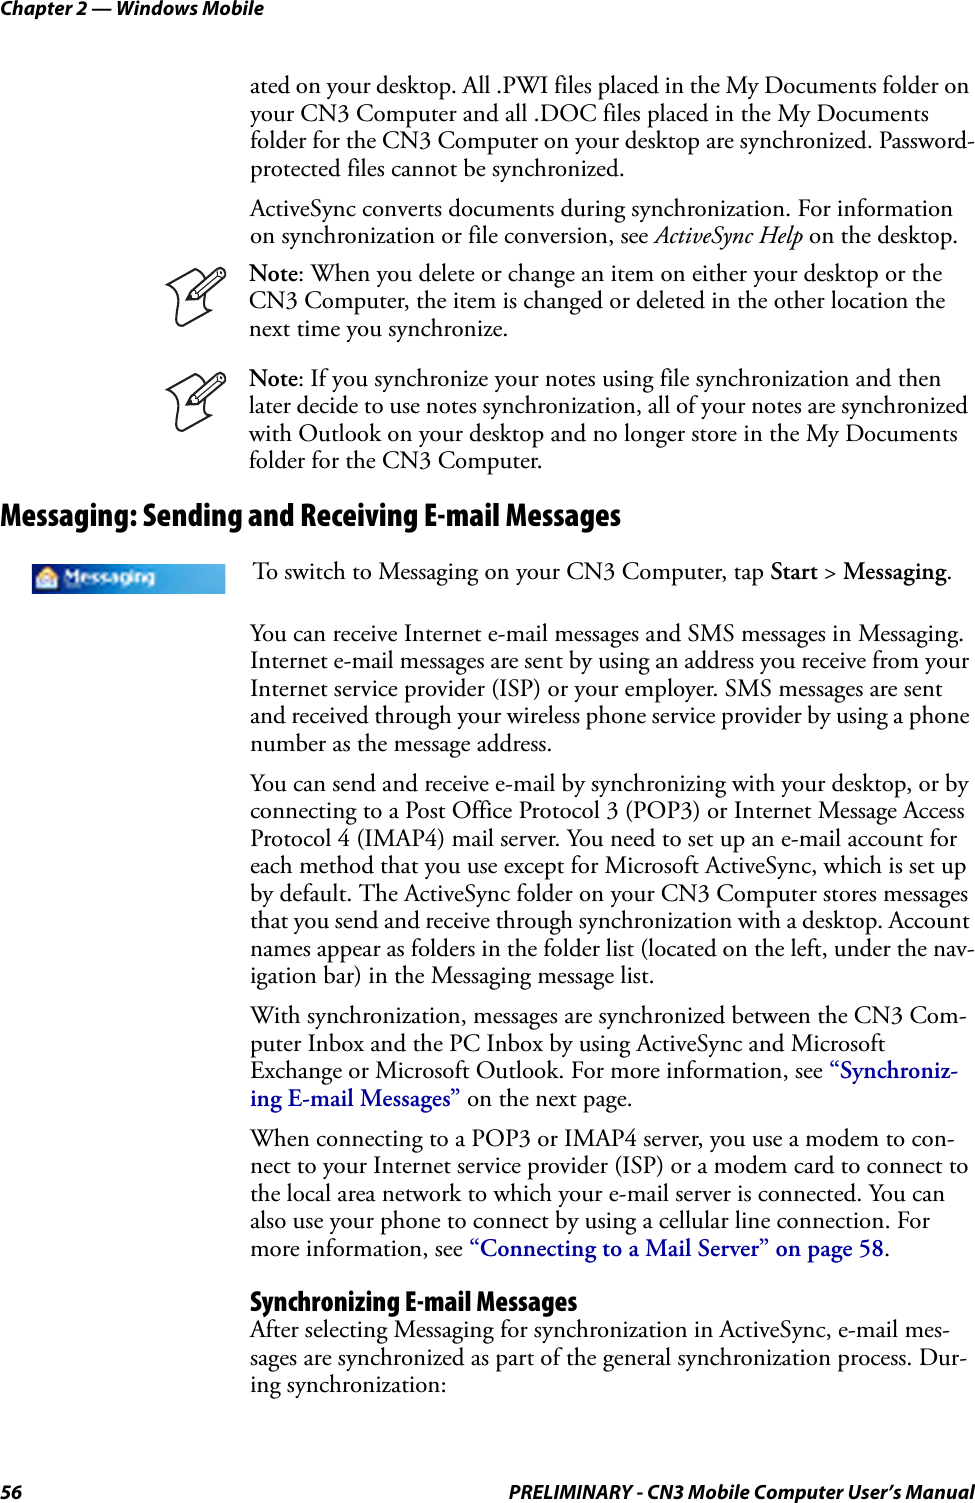 Chapter 2 — Windows Mobile56 PRELIMINARY - CN3 Mobile Computer User’s Manualated on your desktop. All .PWI files placed in the My Documents folder on your CN3 Computer and all .DOC files placed in the My Documents folder for the CN3 Computer on your desktop are synchronized. Password-protected files cannot be synchronized.ActiveSync converts documents during synchronization. For information on synchronization or file conversion, see ActiveSync Help on the desktop.Messaging: Sending and Receiving E-mail MessagesYou can receive Internet e-mail messages and SMS messages in Messaging. Internet e-mail messages are sent by using an address you receive from your Internet service provider (ISP) or your employer. SMS messages are sent and received through your wireless phone service provider by using a phone number as the message address.You can send and receive e-mail by synchronizing with your desktop, or by connecting to a Post Office Protocol 3 (POP3) or Internet Message Access Protocol 4 (IMAP4) mail server. You need to set up an e-mail account for each method that you use except for Microsoft ActiveSync, which is set up by default. The ActiveSync folder on your CN3 Computer stores messages that you send and receive through synchronization with a desktop. Account names appear as folders in the folder list (located on the left, under the nav-igation bar) in the Messaging message list.With synchronization, messages are synchronized between the CN3 Com-puter Inbox and the PC Inbox by using ActiveSync and Microsoft Exchange or Microsoft Outlook. For more information, see “Synchroniz-ing E-mail Messages” on the next page.When connecting to a POP3 or IMAP4 server, you use a modem to con-nect to your Internet service provider (ISP) or a modem card to connect to the local area network to which your e-mail server is connected. You can also use your phone to connect by using a cellular line connection. For more information, see “Connecting to a Mail Server” on page 58.Synchronizing E-mail MessagesAfter selecting Messaging for synchronization in ActiveSync, e-mail mes-sages are synchronized as part of the general synchronization process. Dur-ing synchronization:Note: When you delete or change an item on either your desktop or the CN3 Computer, the item is changed or deleted in the other location the next time you synchronize.Note: If you synchronize your notes using file synchronization and then later decide to use notes synchronization, all of your notes are synchronized with Outlook on your desktop and no longer store in the My Documents folder for the CN3 Computer.To switch to Messaging on your CN3 Computer, tap Start &gt; Messaging.